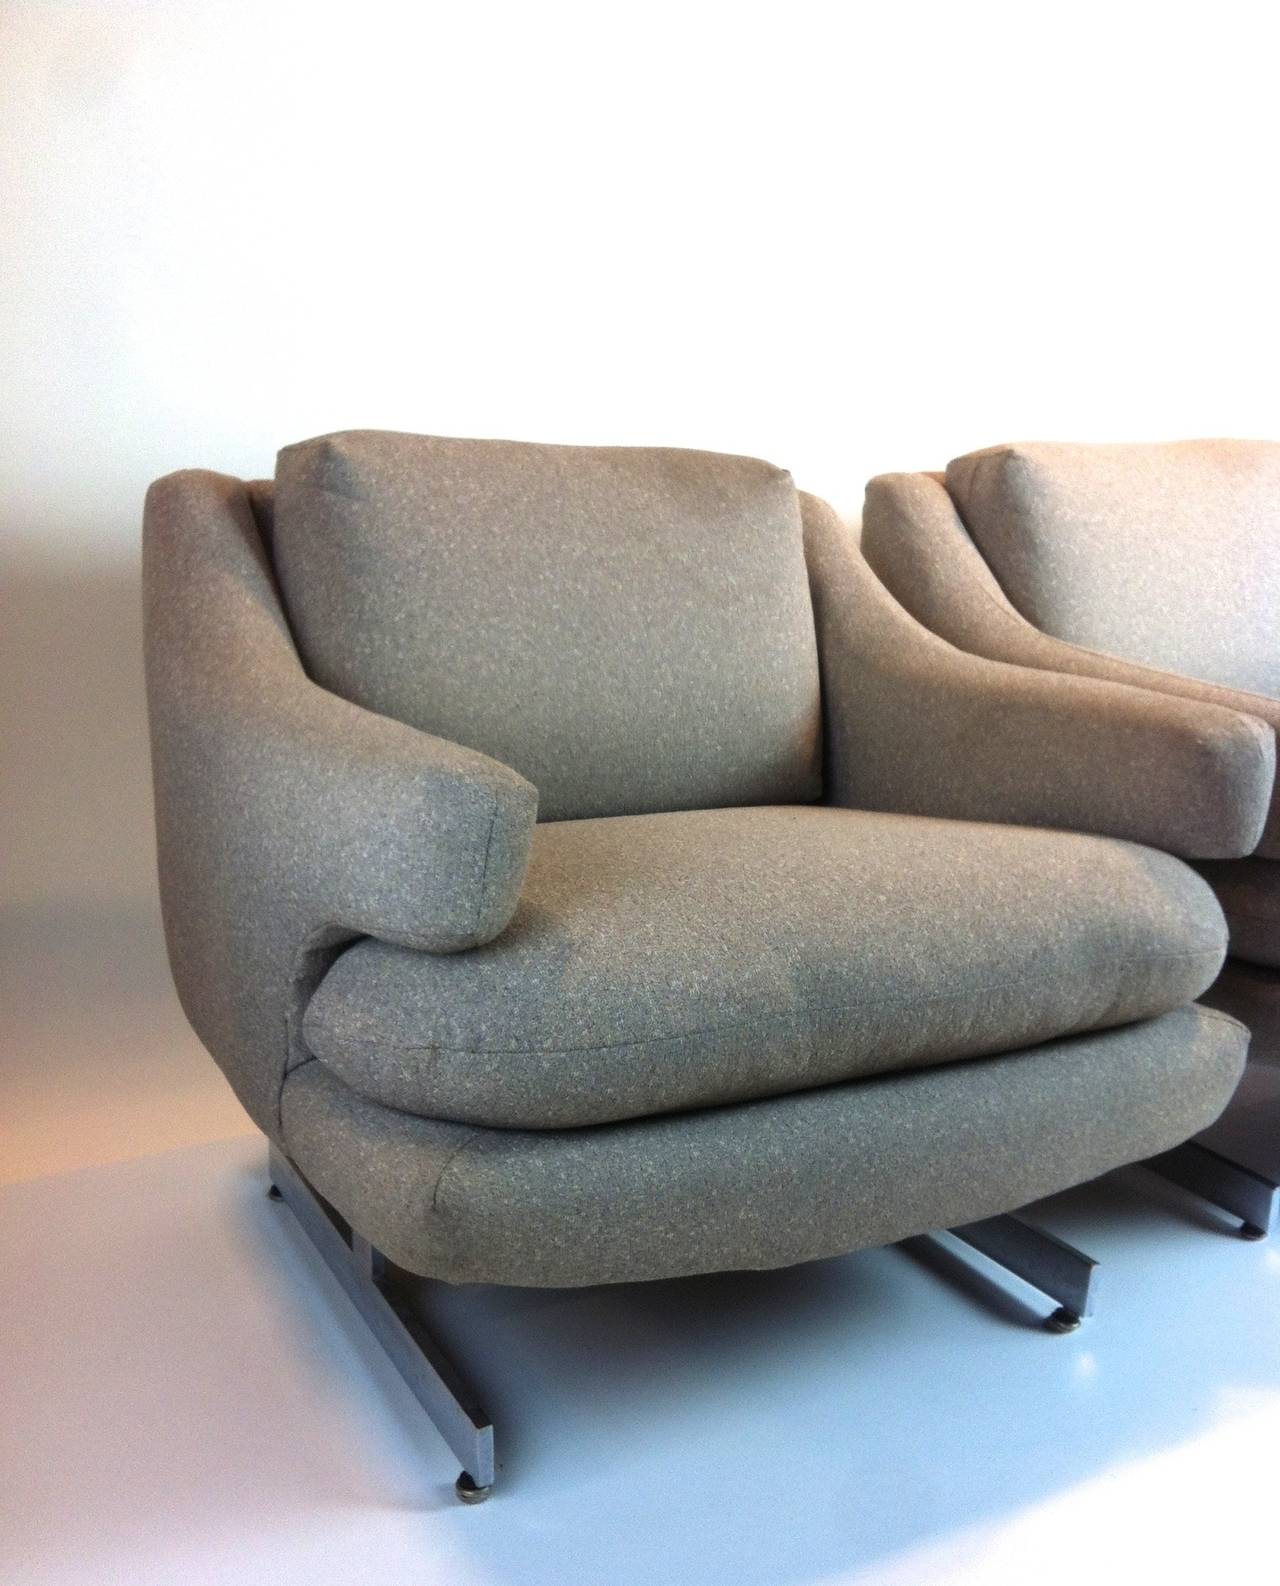 This handsome pair floats on a chrome base, offering comfort and style without the weight.  Designed in the 1970s by Milo Baughman.  They are good candidates for reupholstering and this is reflected in the pricing. C.O.M. services available.